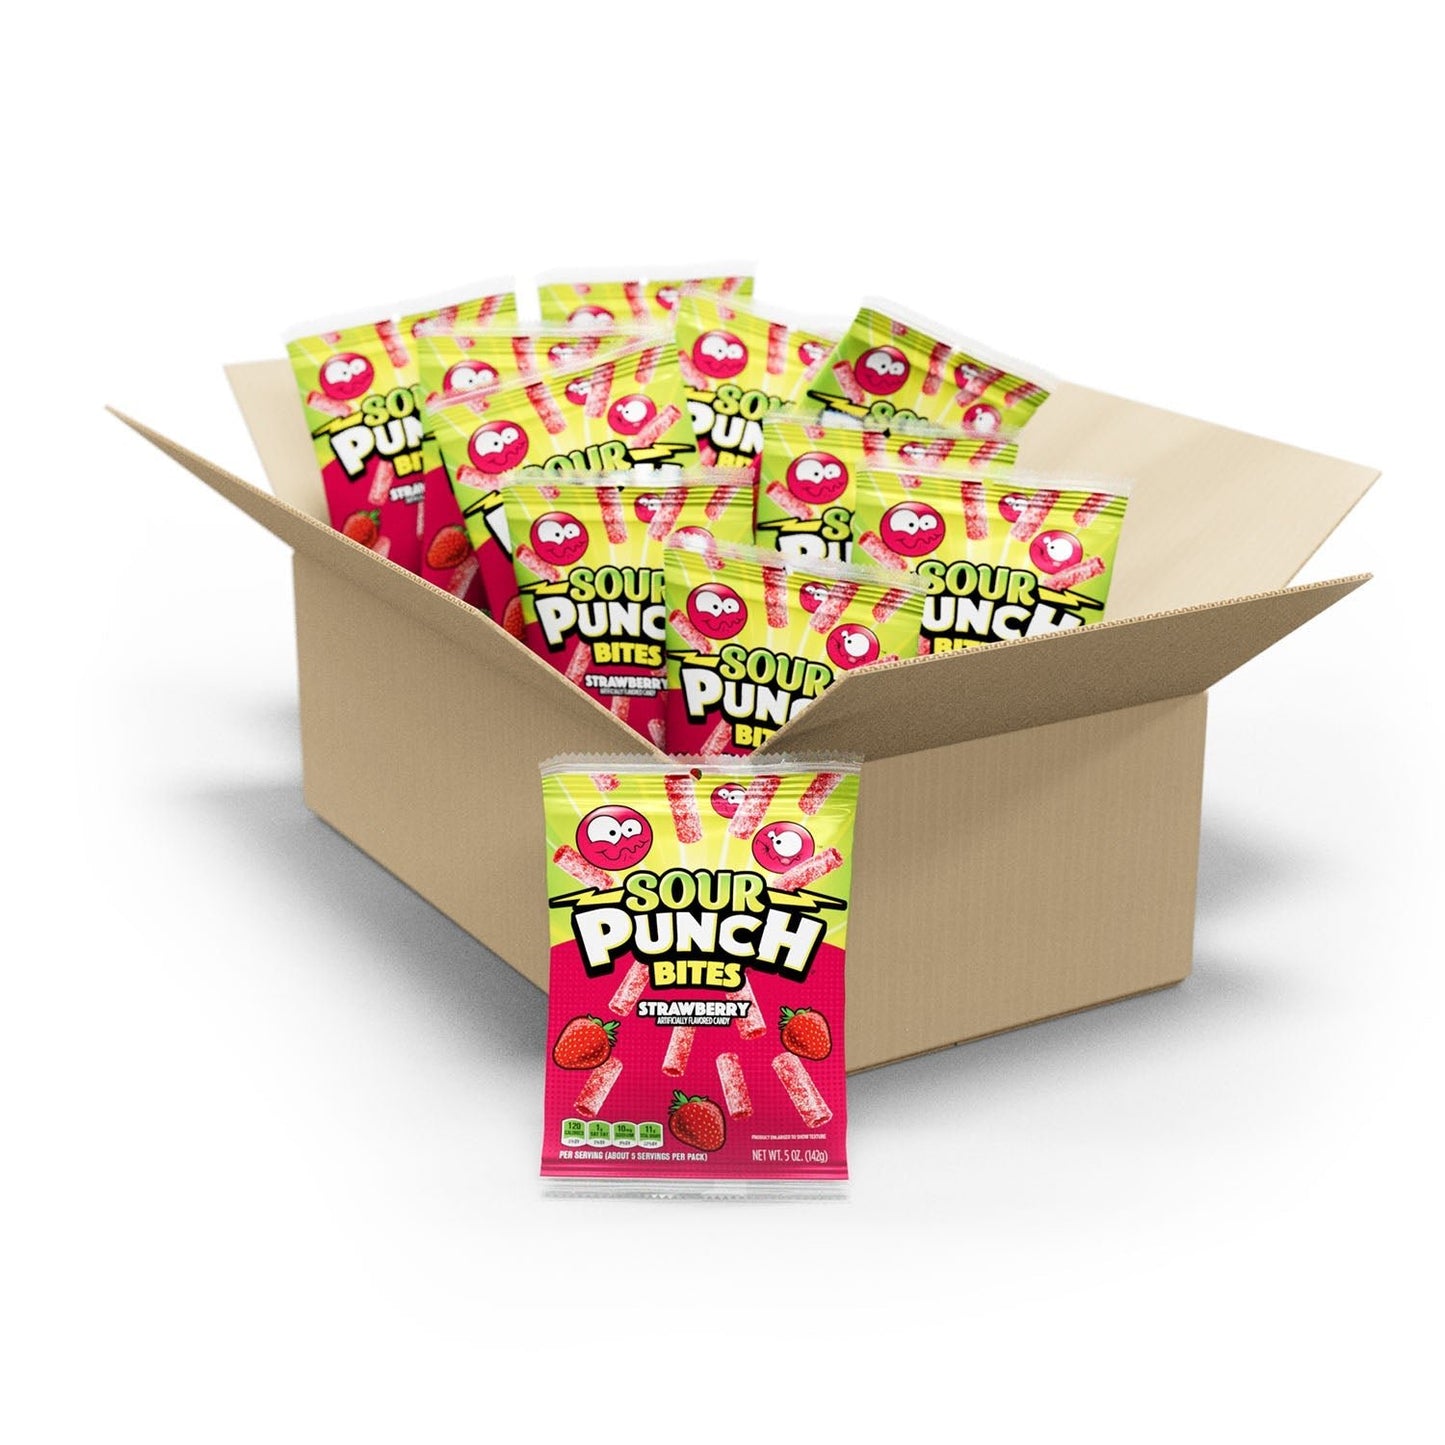 12 count bulk box of Sour Punch Bites Strawberry 5oz hanging bags